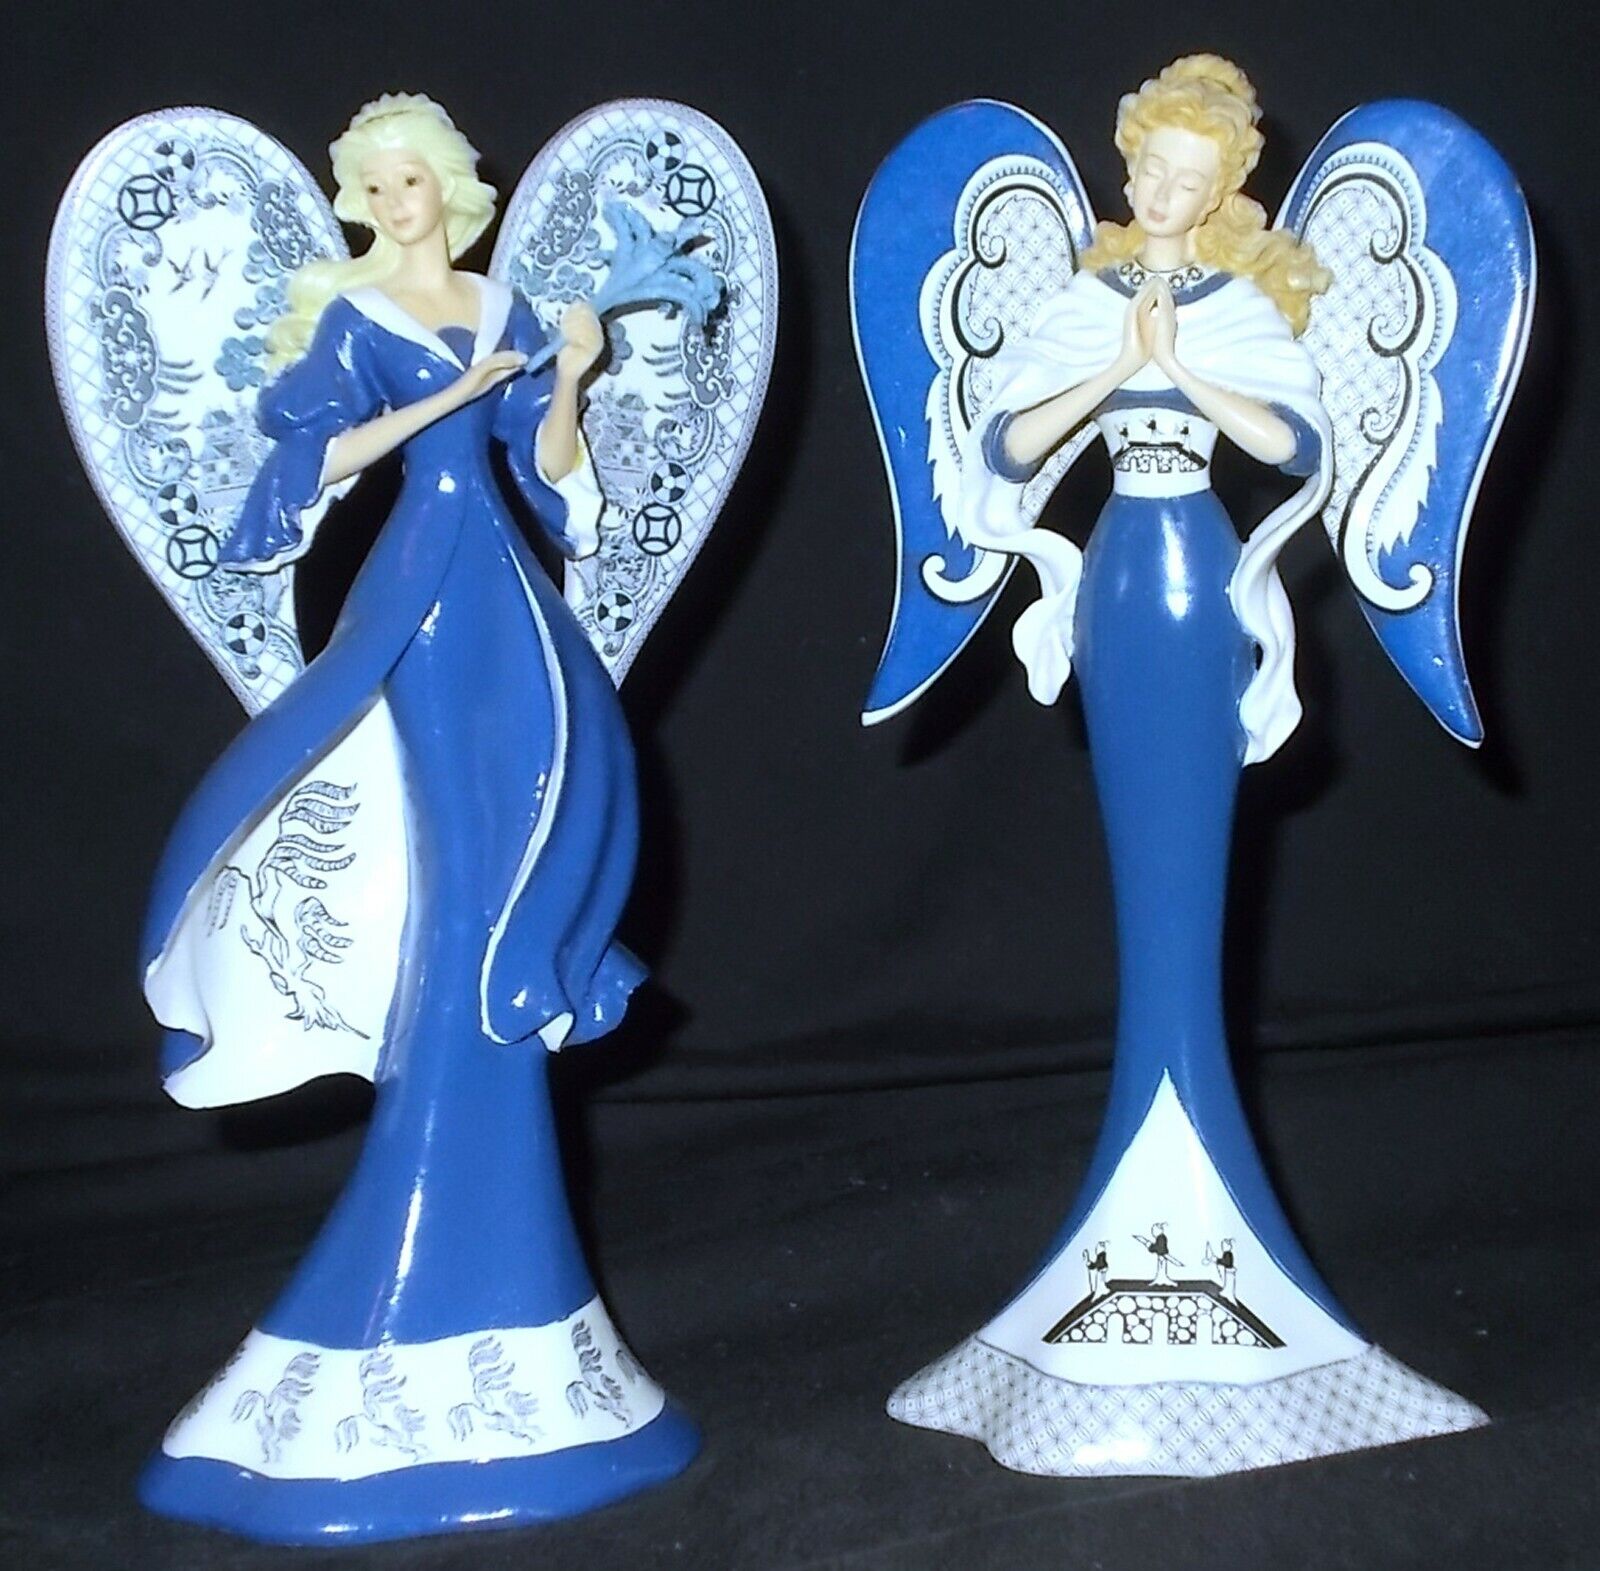 Image 1 - Hamilton Angels of Blue Willow PROTECTION FOR A PEACEFUL PASSAGE Figure + 1